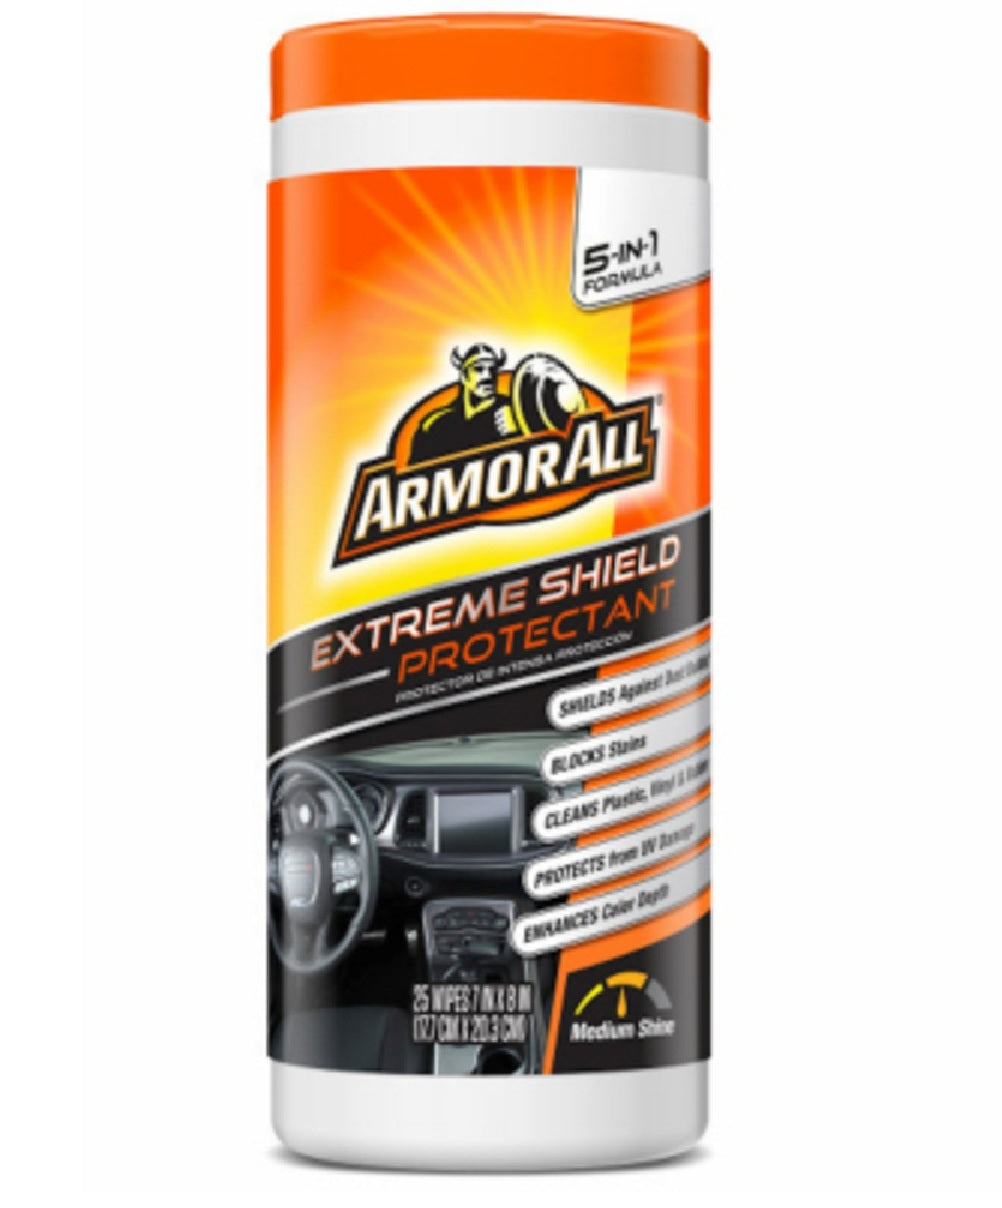 Armor All 19145 Extreme Shield Protectant Wipes, 25 Count